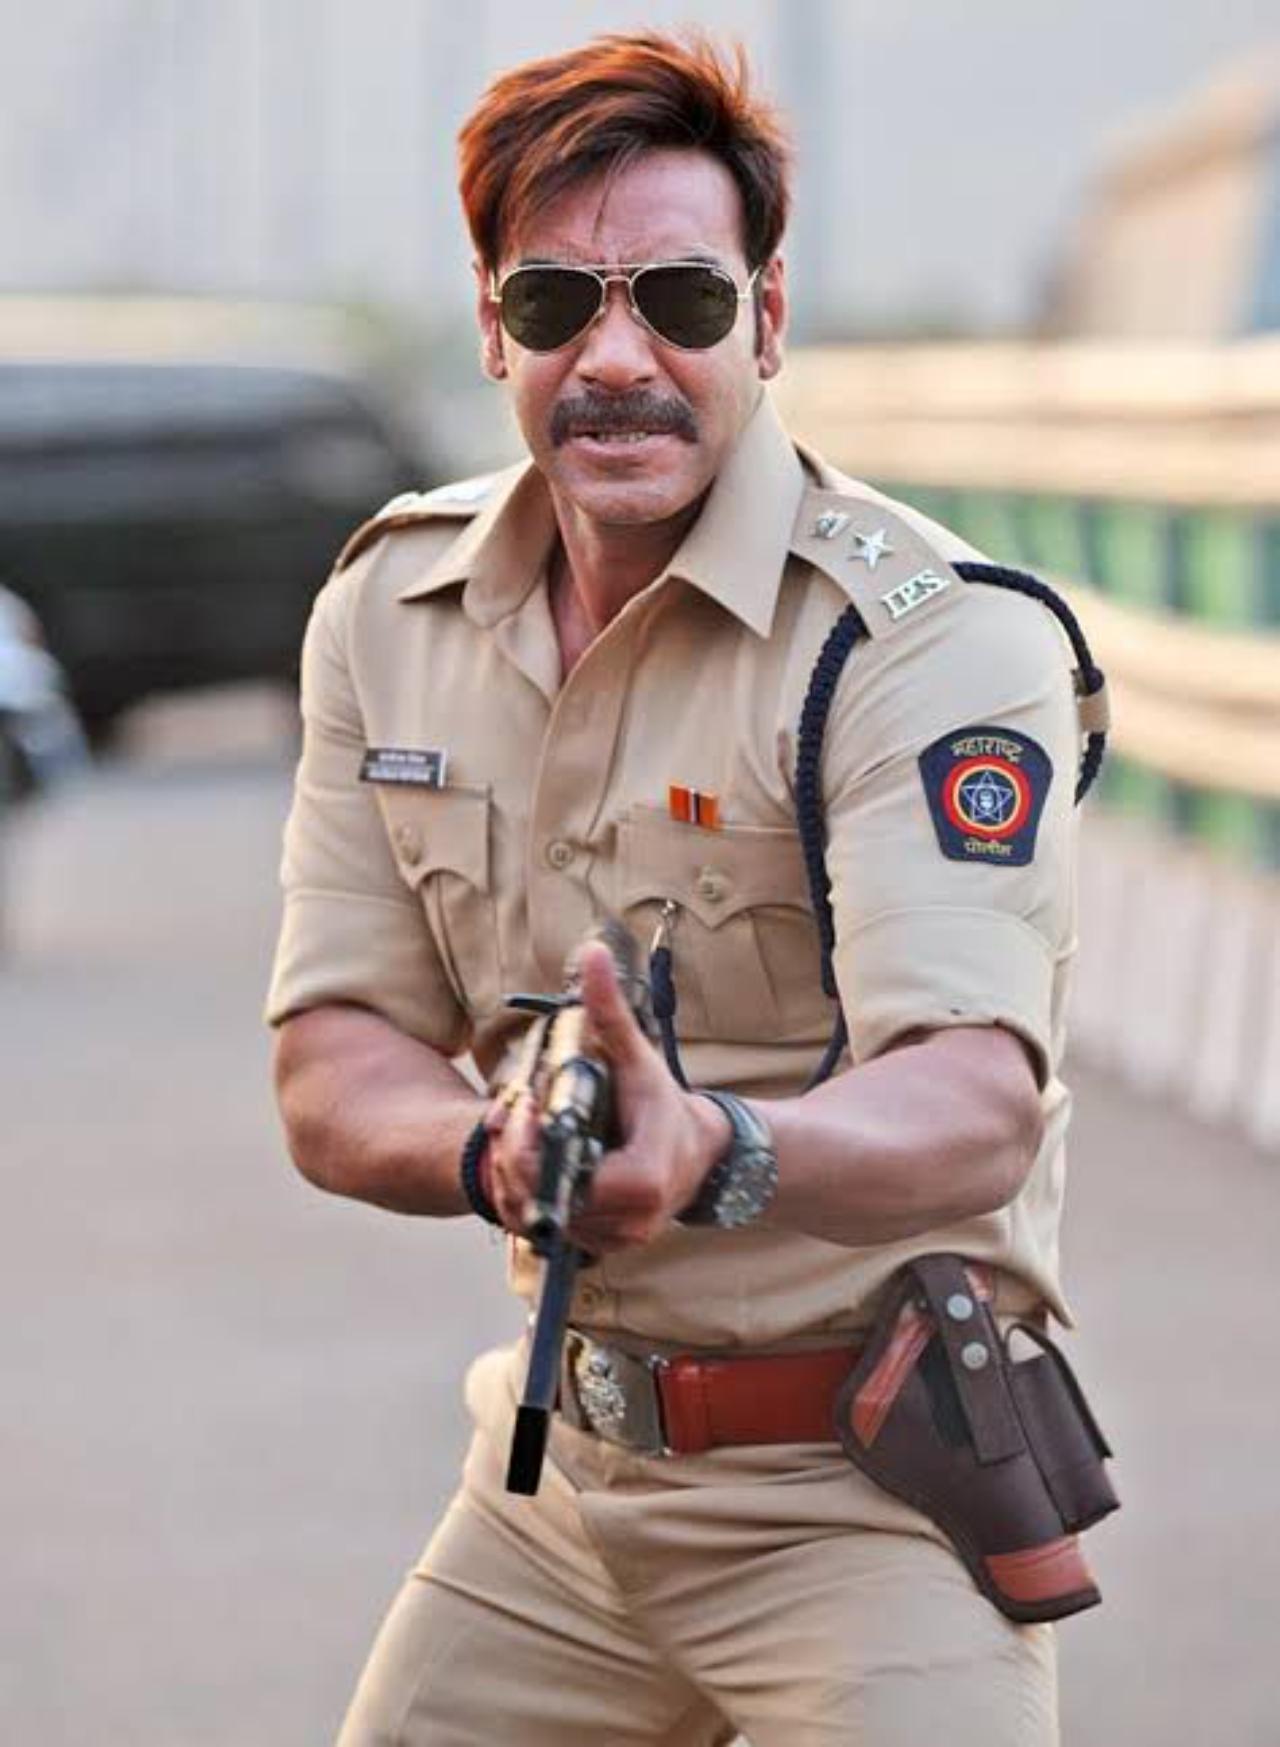 Ajay Devgn in Singham
Leaving the entire cinema theatres roaring with whistles and applause, Ajay Devgn's entry as Singham is an unmissable sight! Marking the beginning of a cop universe, Ajay Devgn as Singham is one of the most popular and loved police officers of Indian Entertainment industry